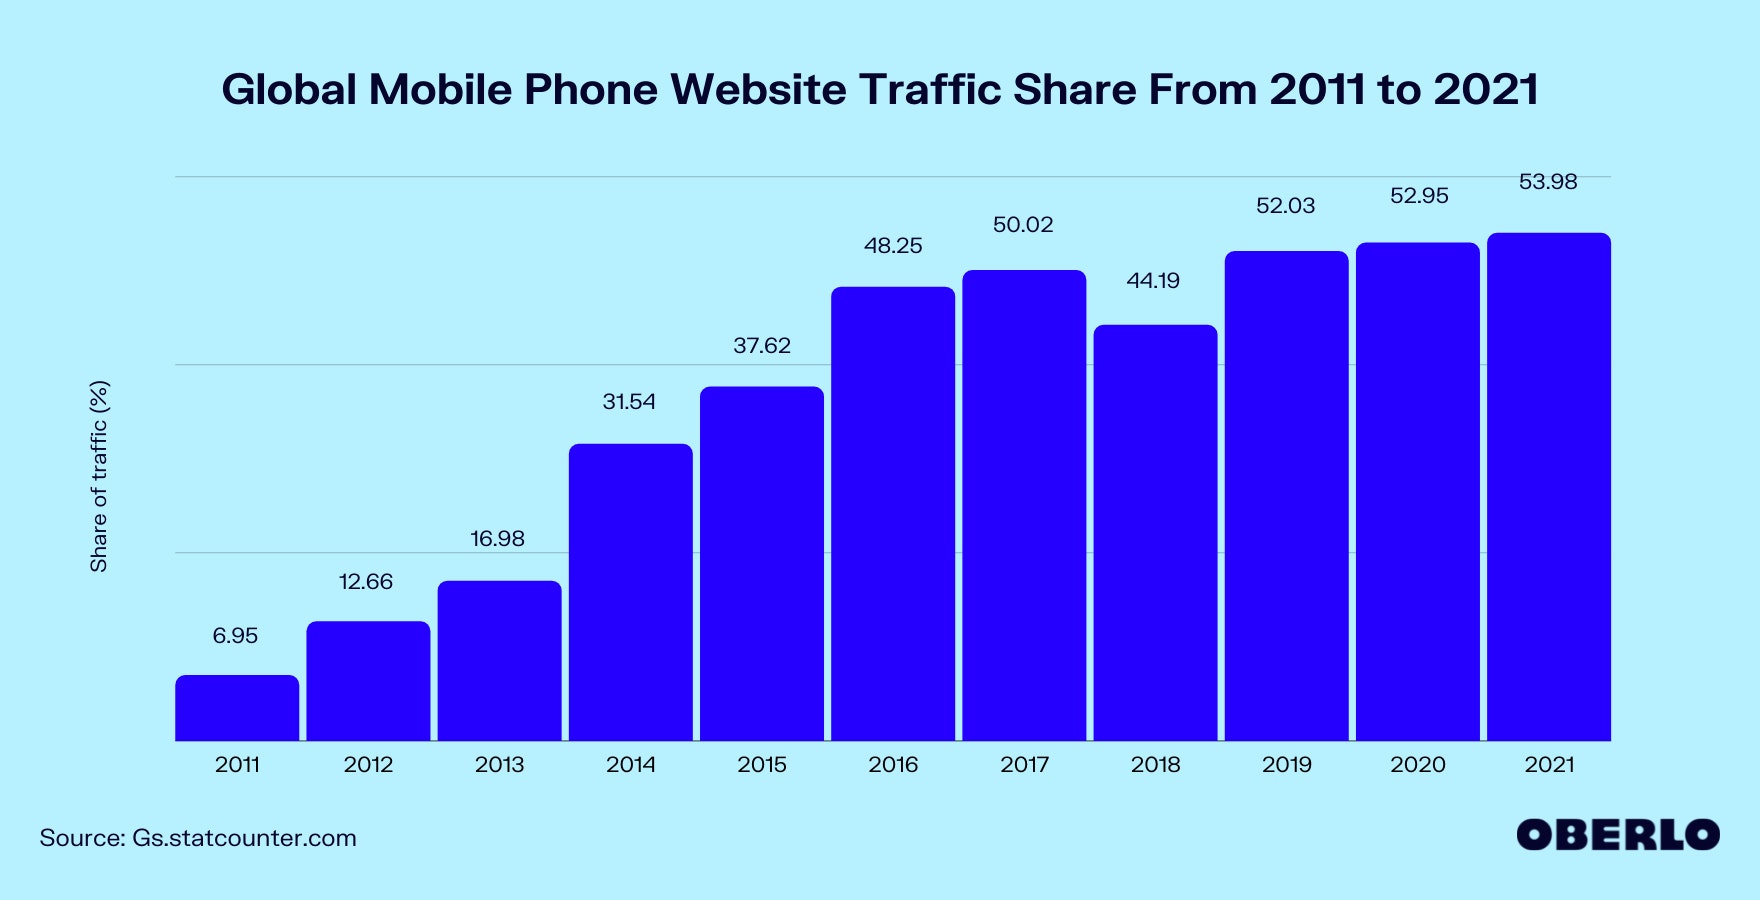 Chart of Global Mobile Phone Website Traffic Share From 2011 to 2021